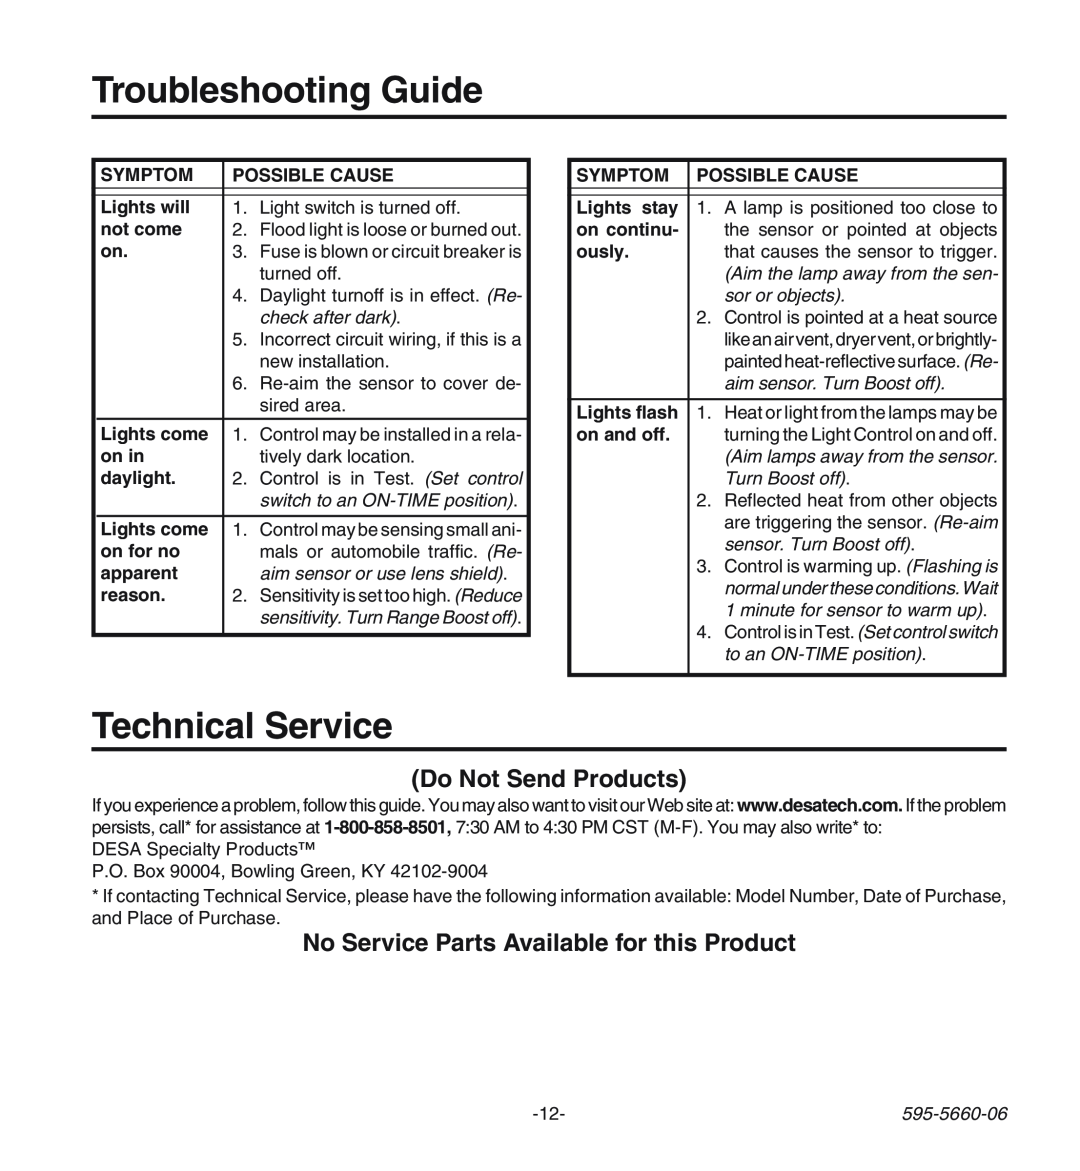 Desa HD-9140 Troubleshooting Guide, Technical Service, Do Not Send Products, No Service Parts Available for this Product 